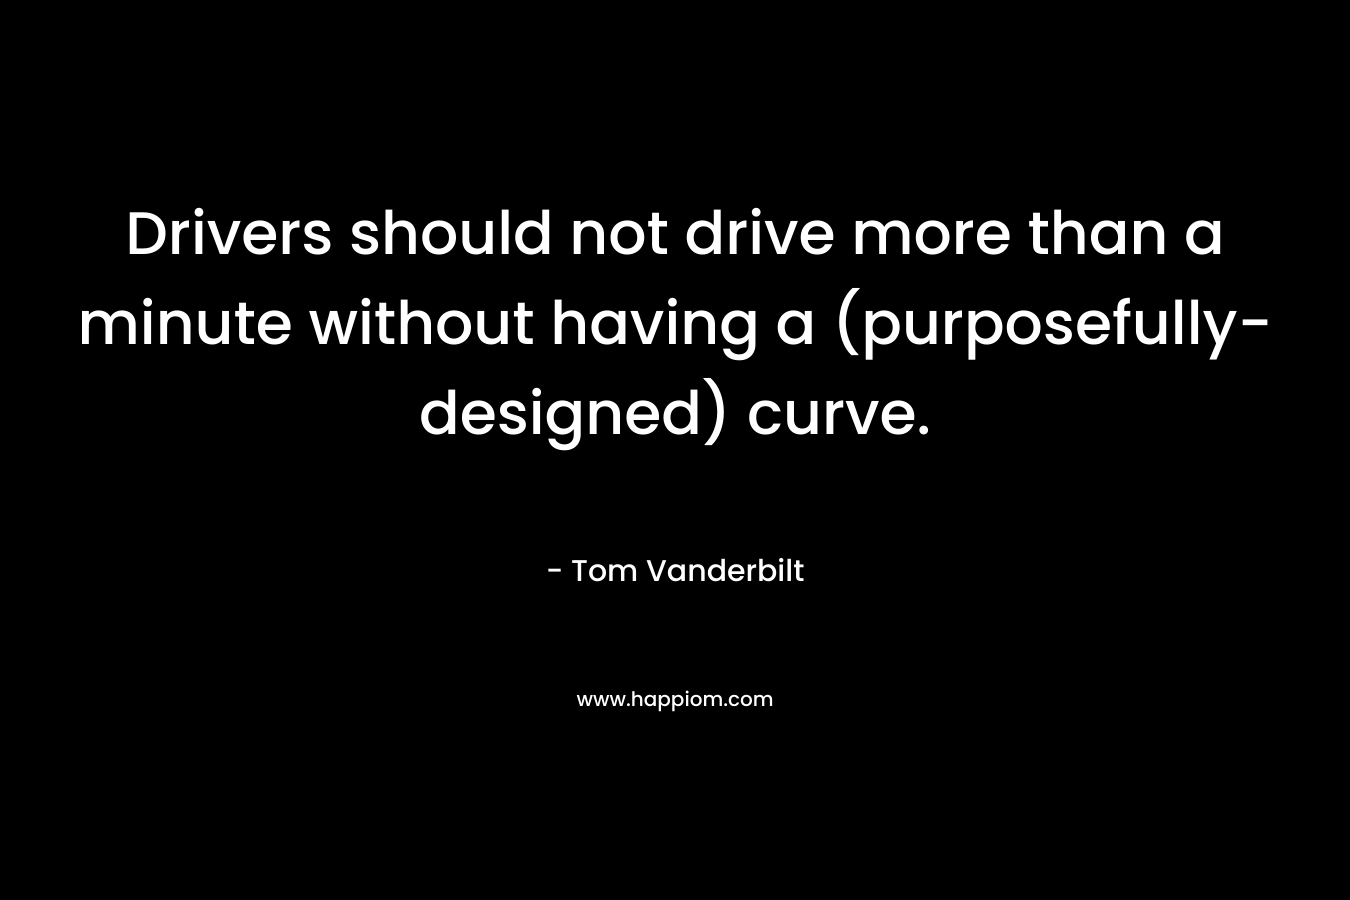 Drivers should not drive more than a minute without having a (purposefully-designed) curve. – Tom Vanderbilt